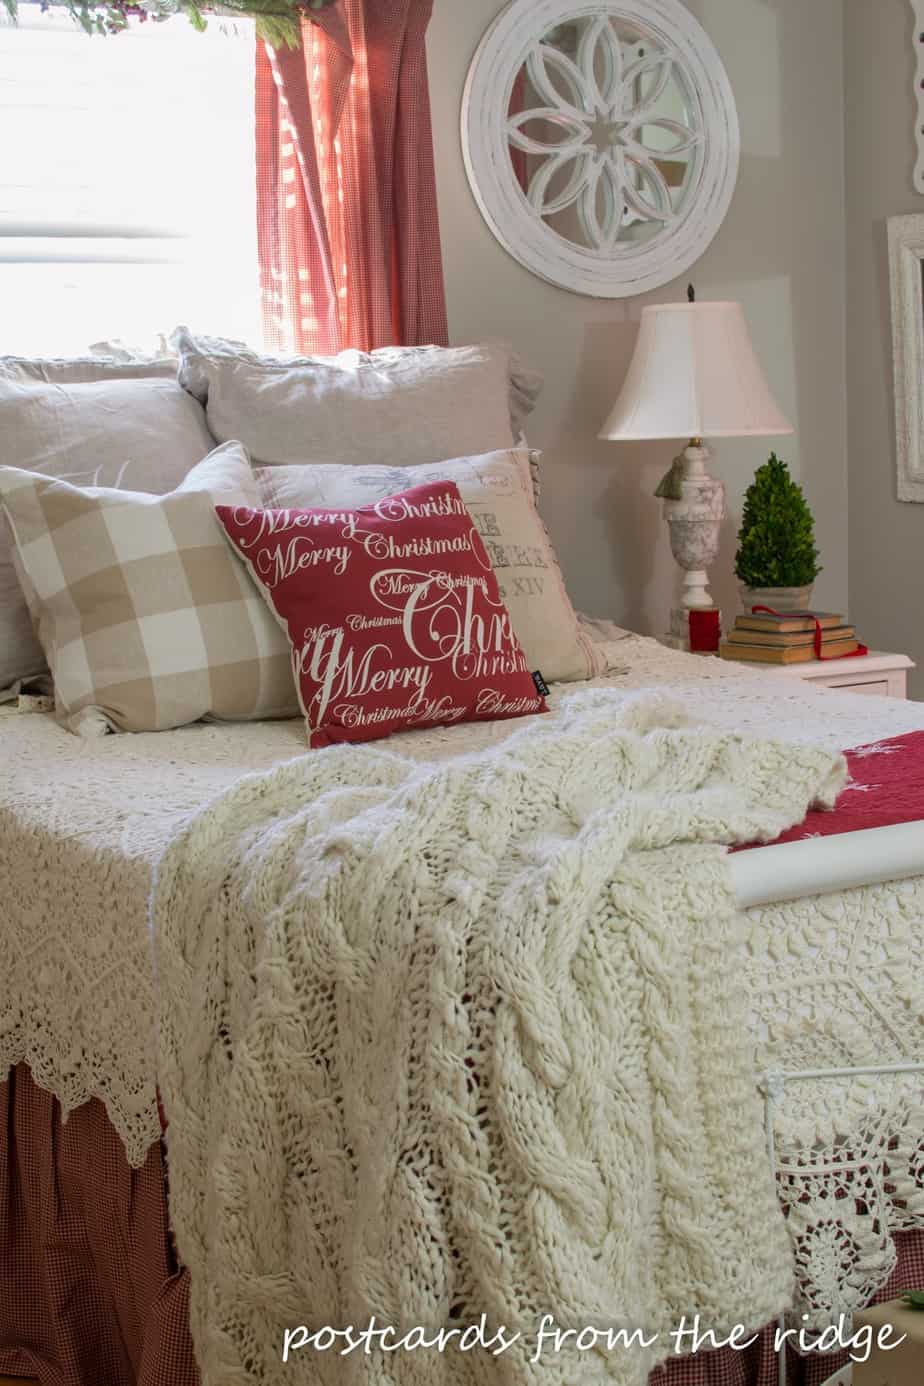 Such a beautiful, cozy Christmas bedroom. Lots of other great Christmas decorating ideas on this site.